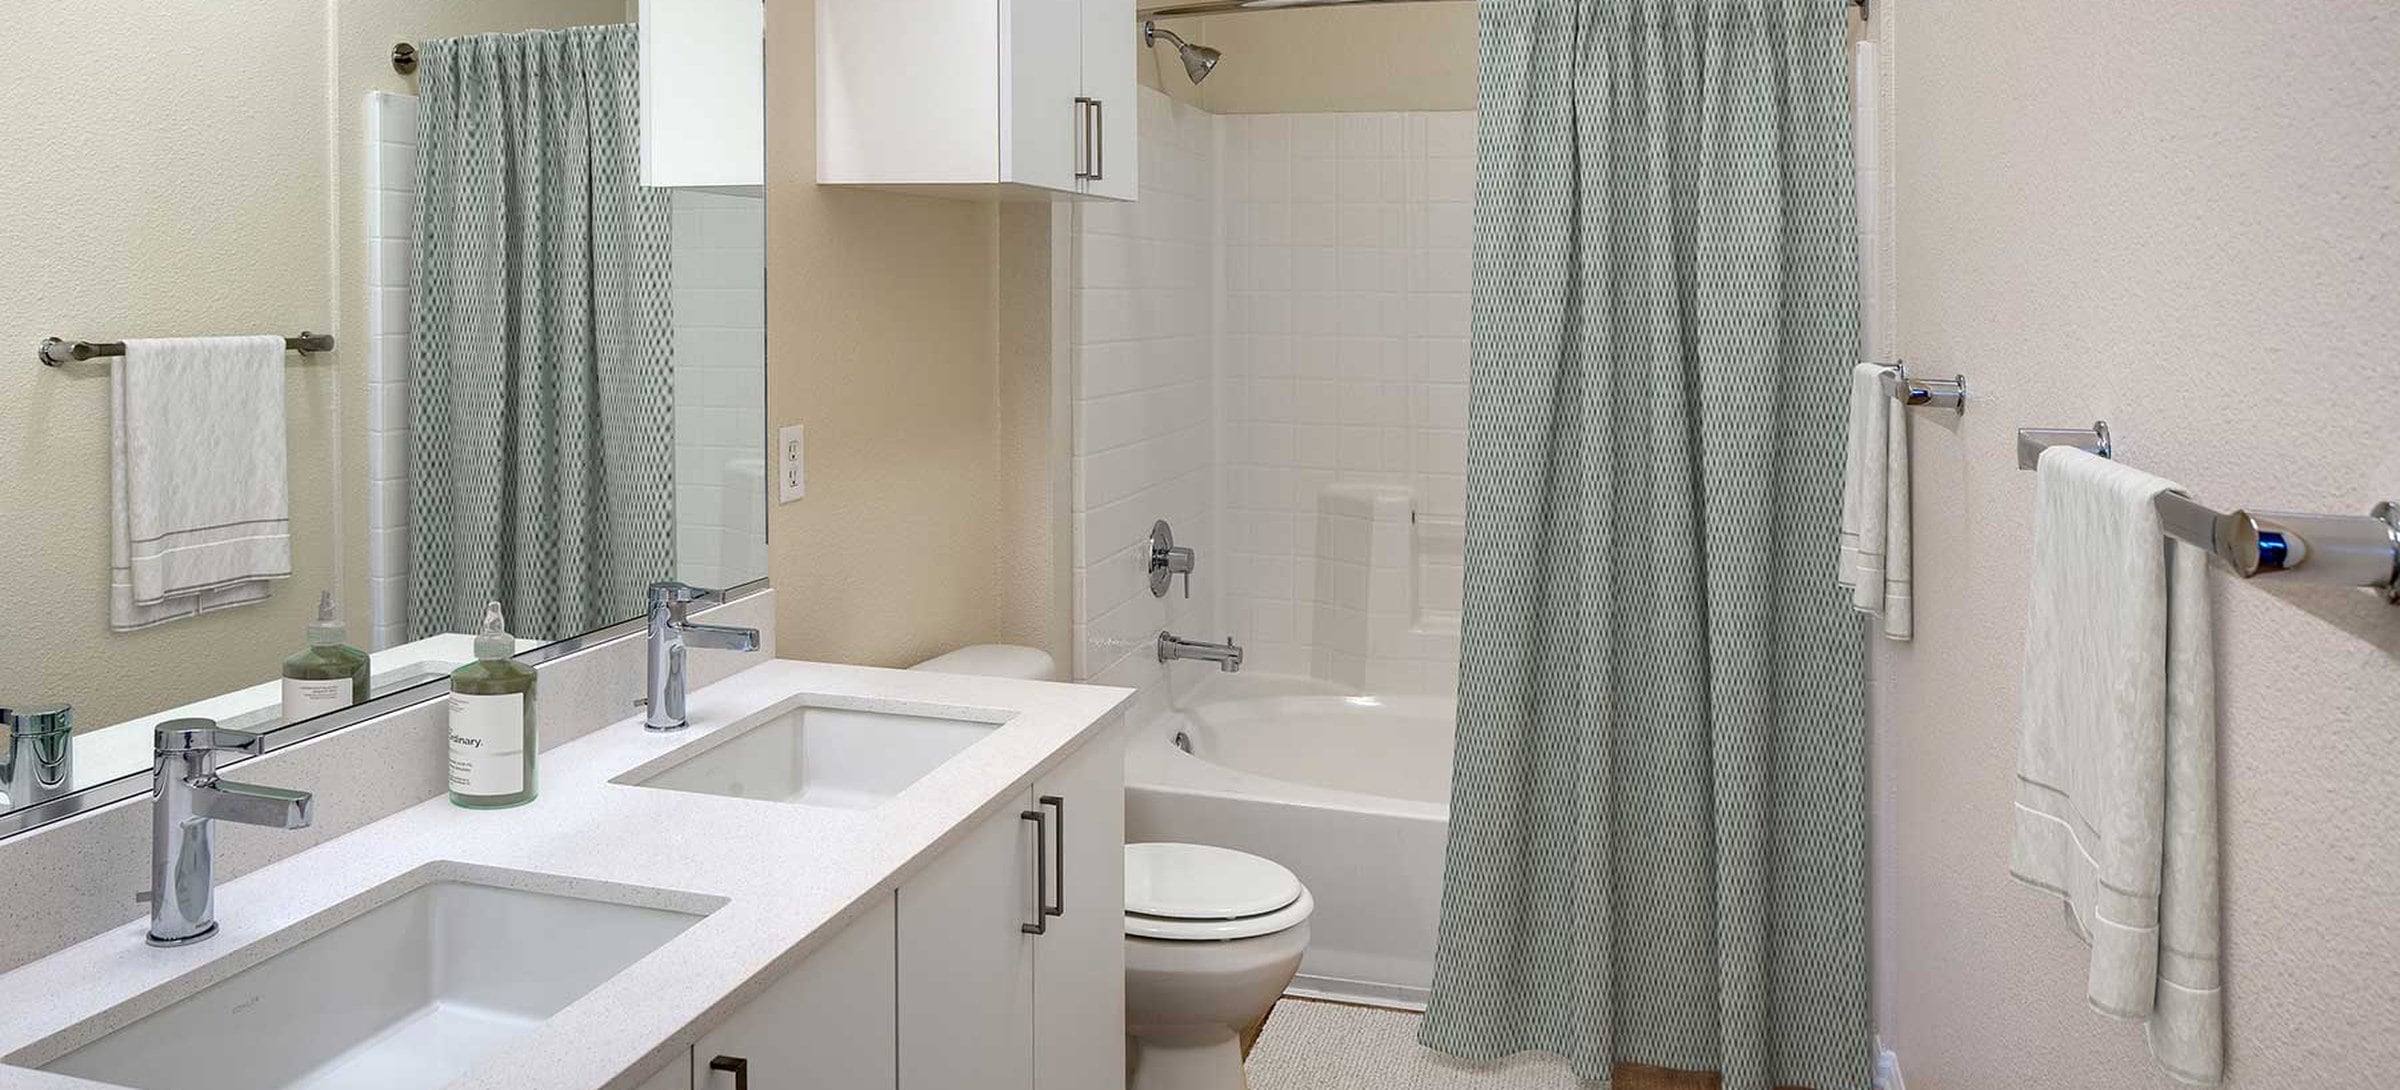 Renovated Package I bathroom featuring white cabinetry, white quartz countertops, and hard surface flooring